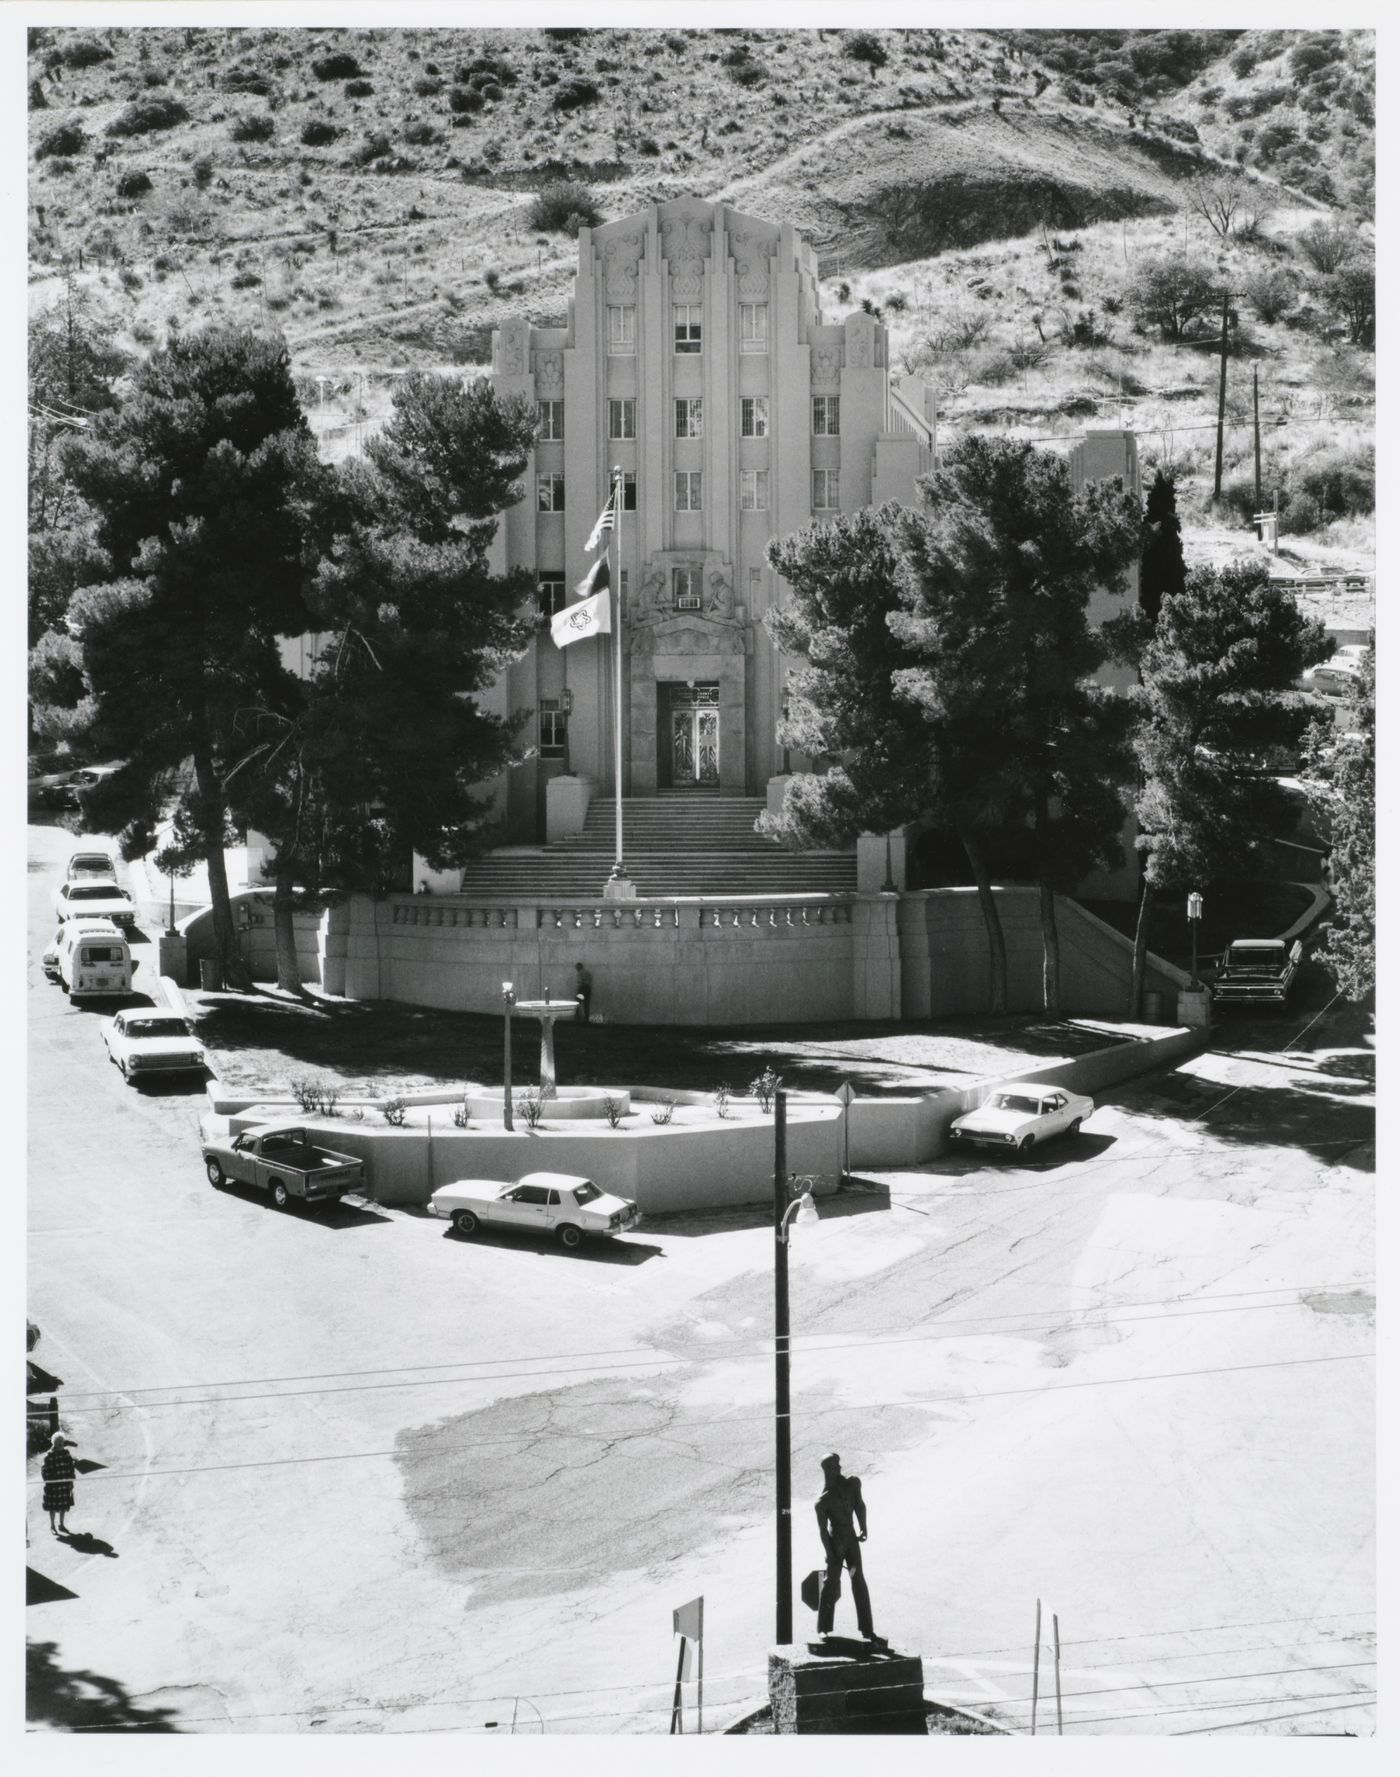 View of the Cochise County Courthouse showing a fountain and the Copper Miner Statue (also known as the Iron Man Statue) in the foreground, Tombstone Canyon Boulevard and Quality Hill Street, Bisbee, Arizona, United States